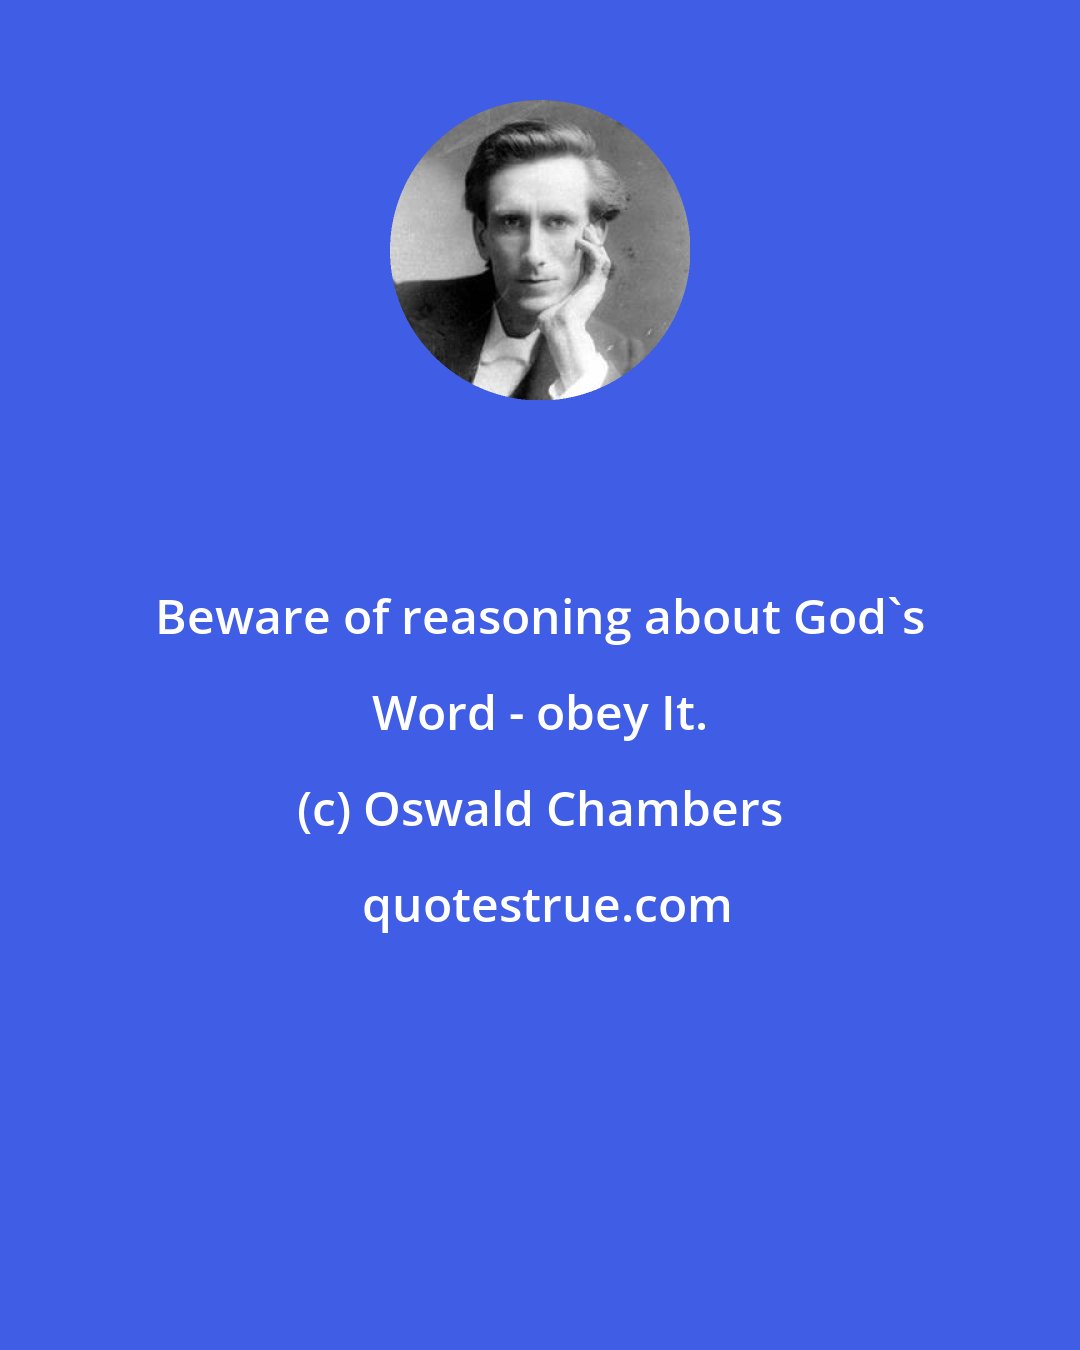 Oswald Chambers: Beware of reasoning about God's Word - obey It.